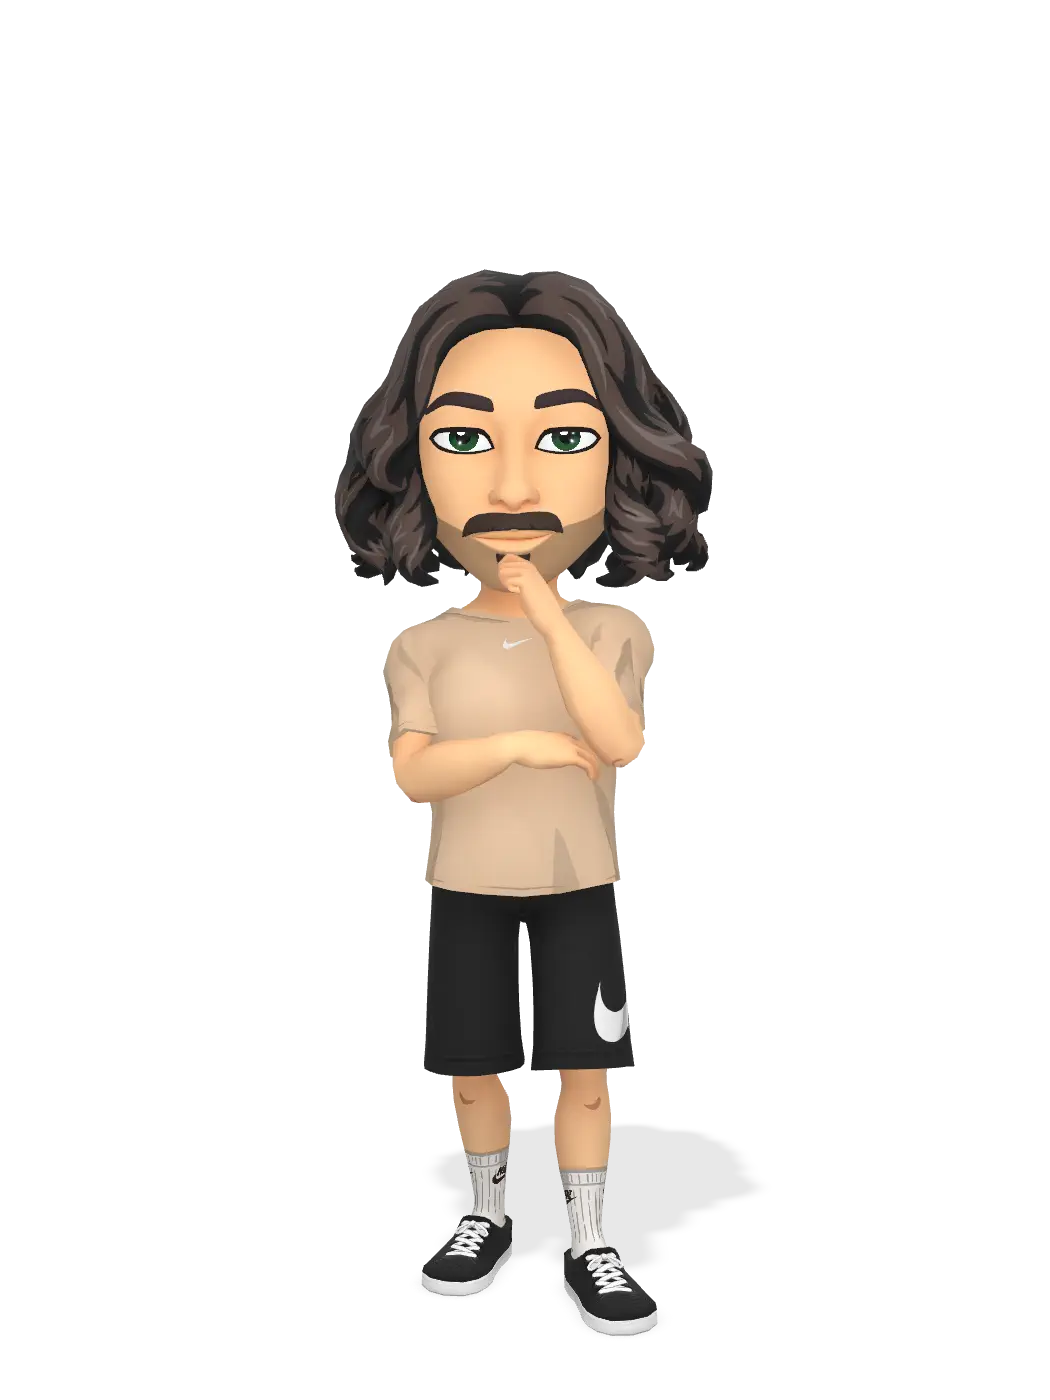 3D Bitmoji for nthconnor